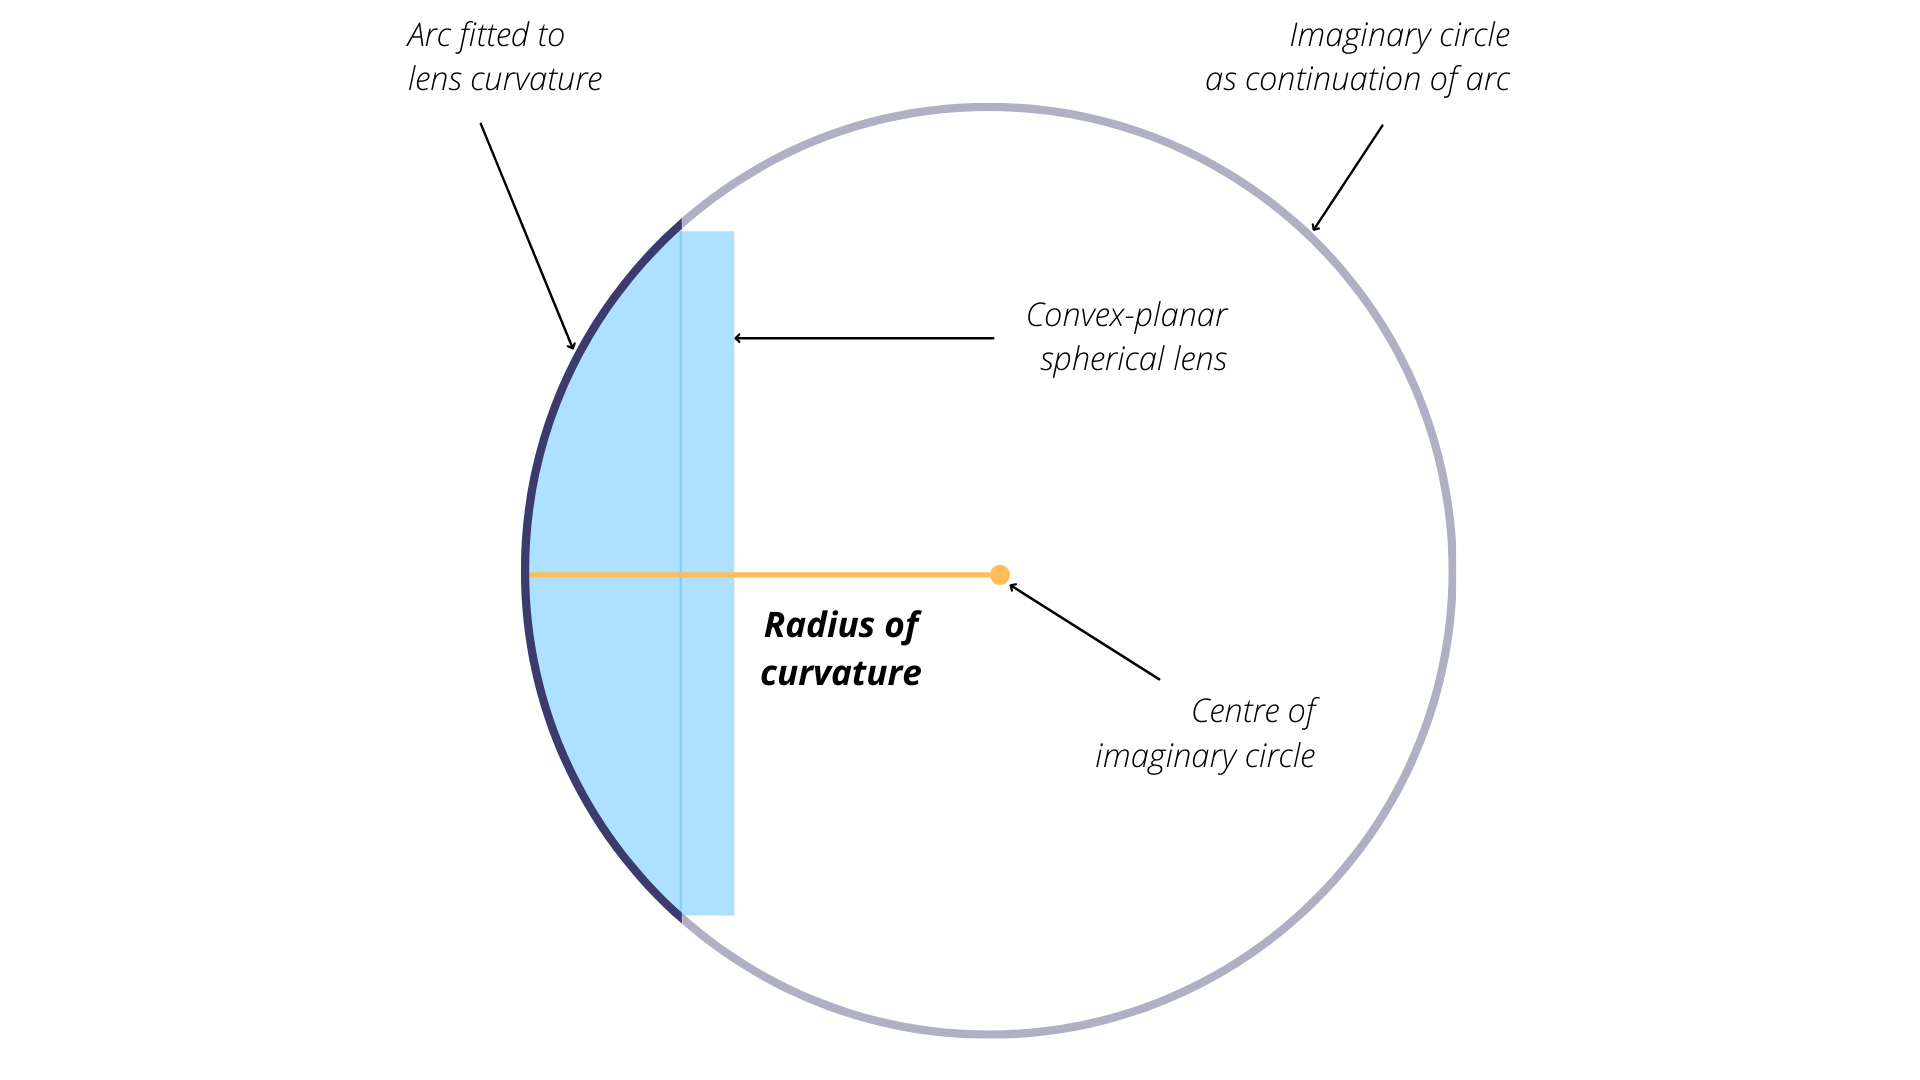 Measuring the radius of curvature for a convex optical surface. Claire Armour. [CC BY 4.0](https://creativecommons.org/licenses/by/4.0/)